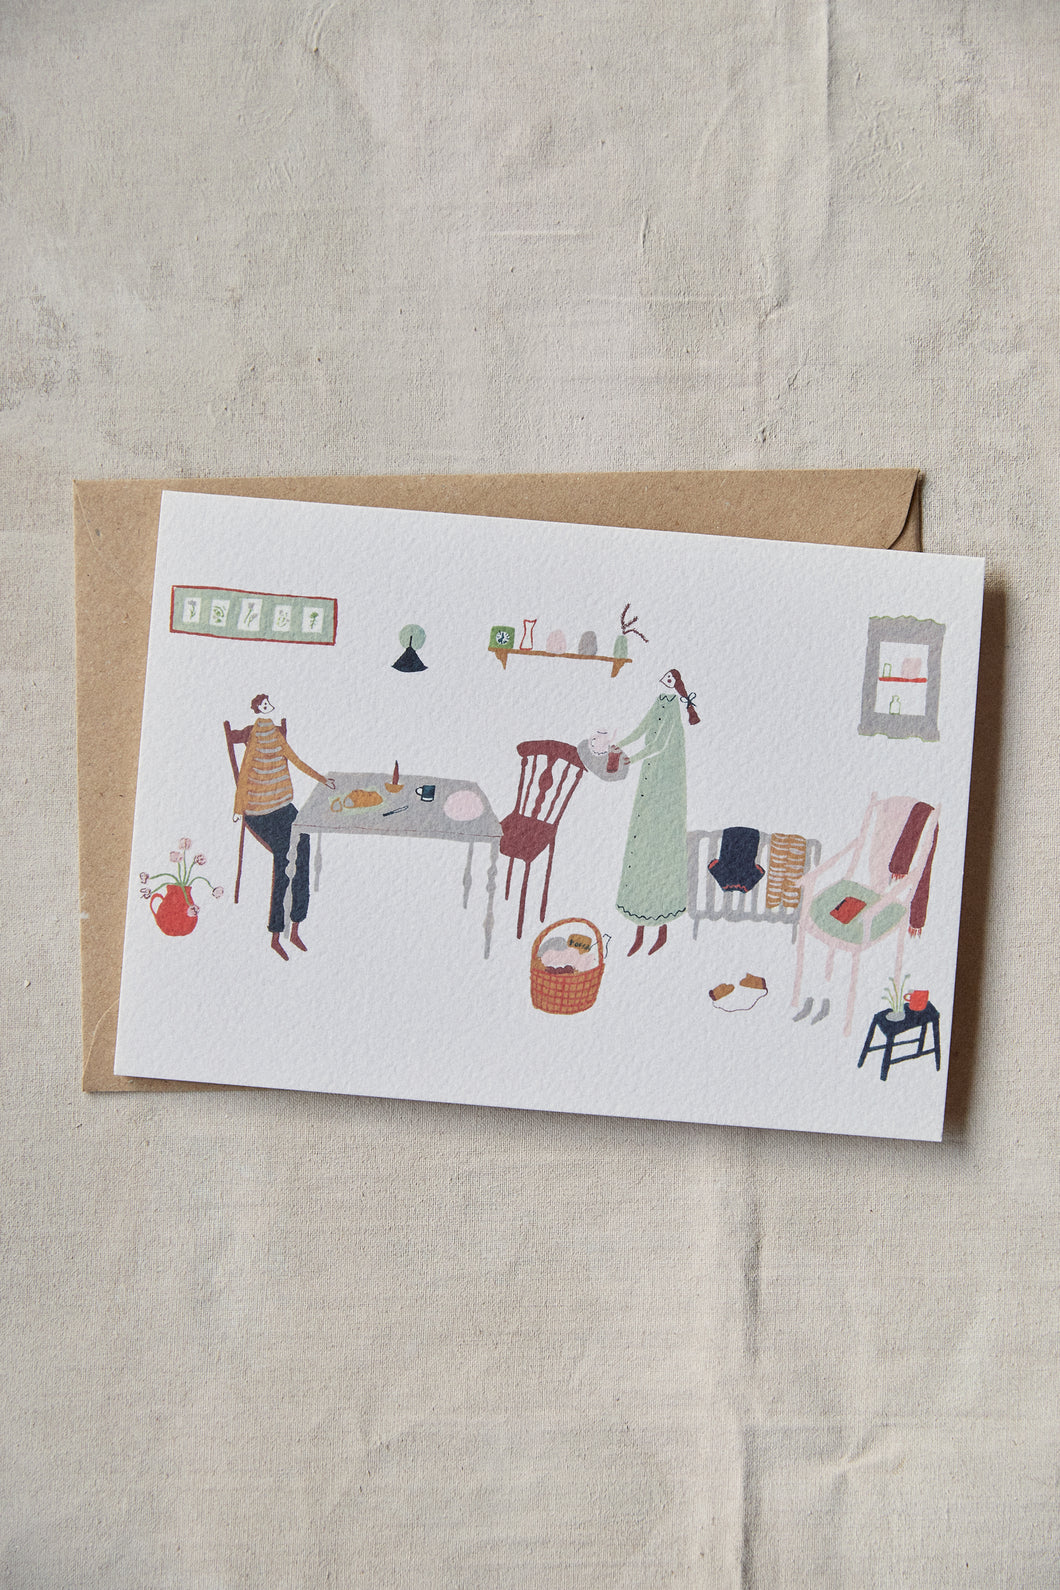 Shop at Settle | Harriet Watson Slow Sunday - charming hand illustrated colour greetings card of two guests enjoying the rustic interior of Carriage No. 1 at Settle, on a pale timber background.    